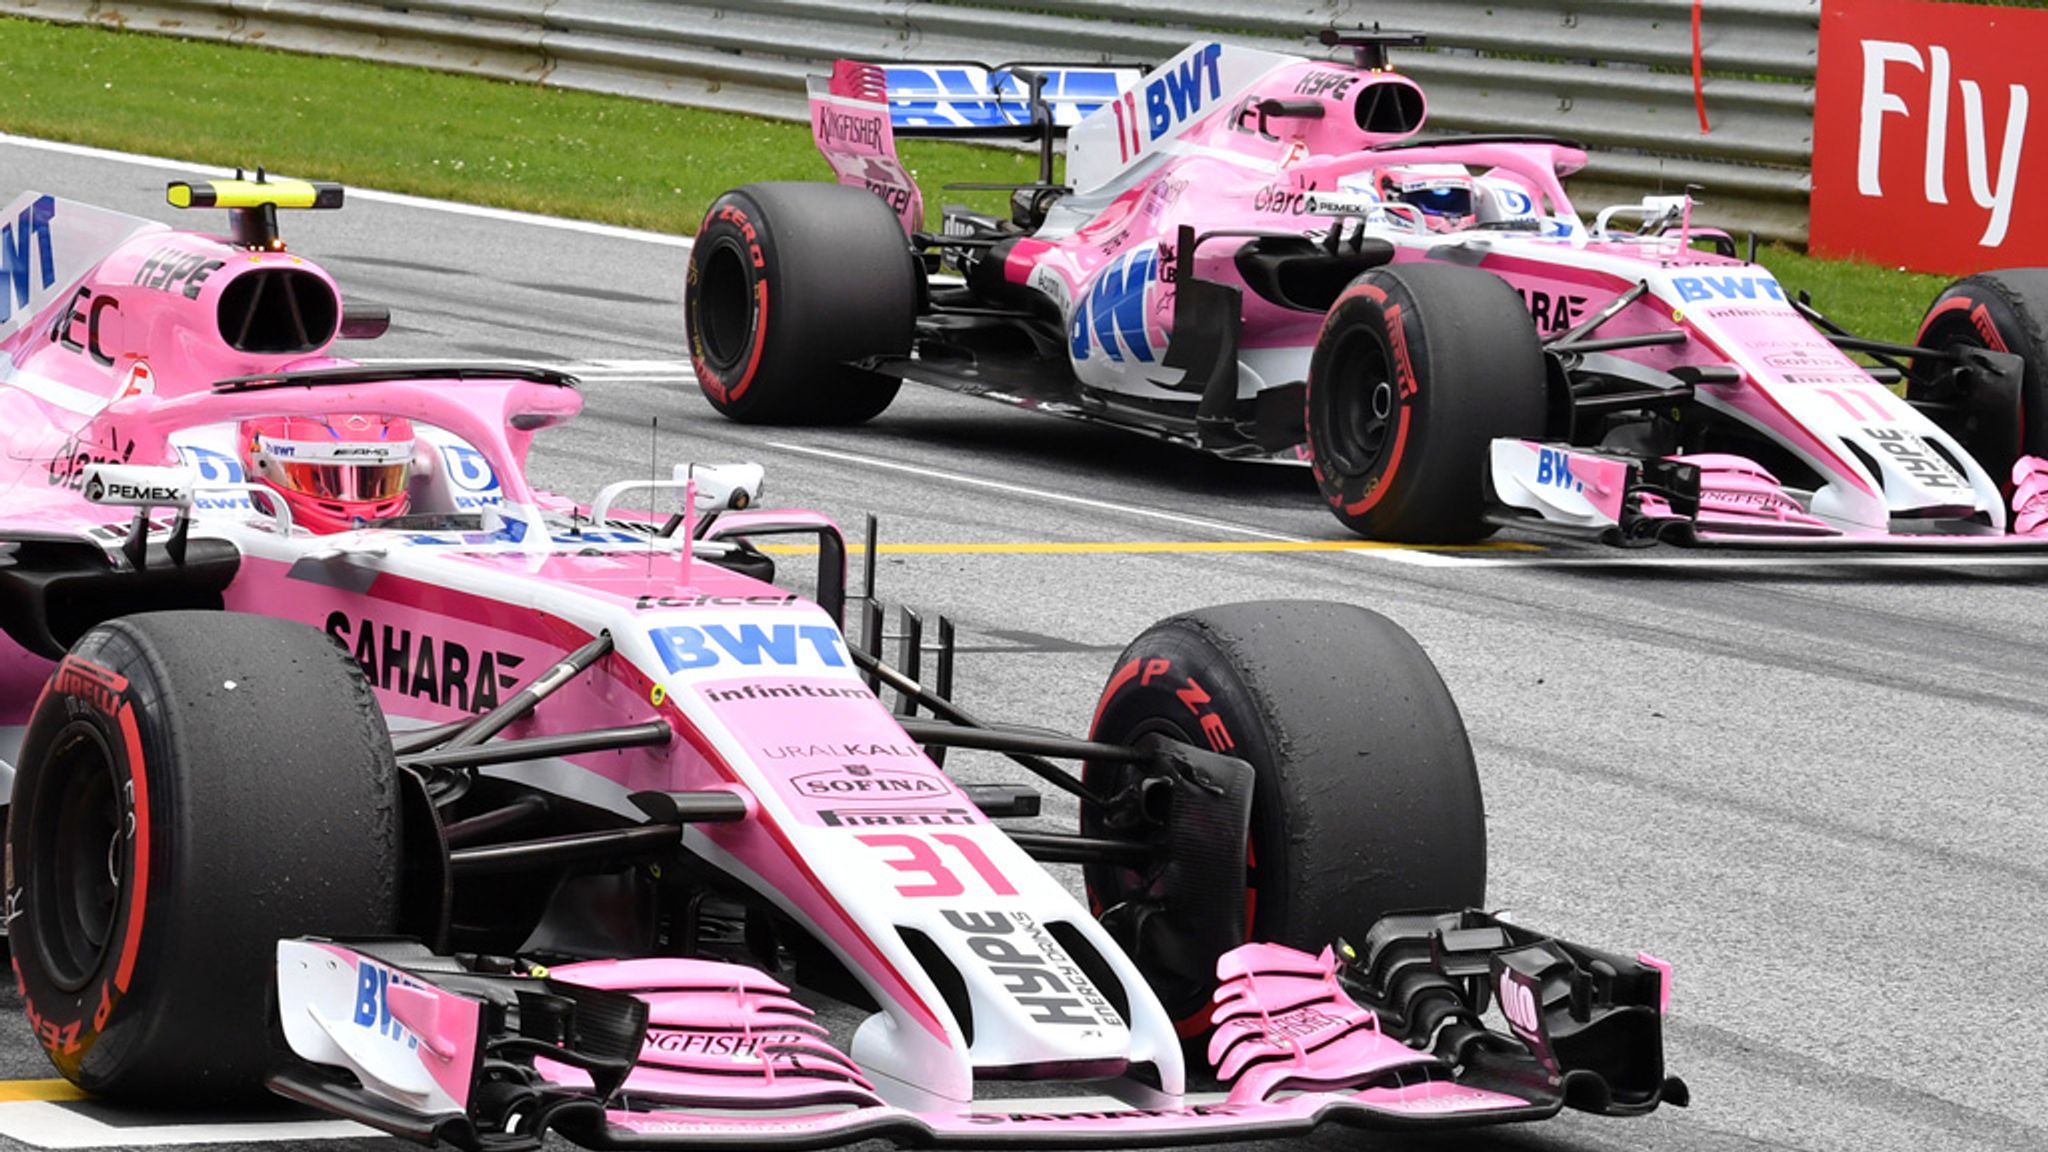 The other men behind the Stroll-led Force India F1 team buyout